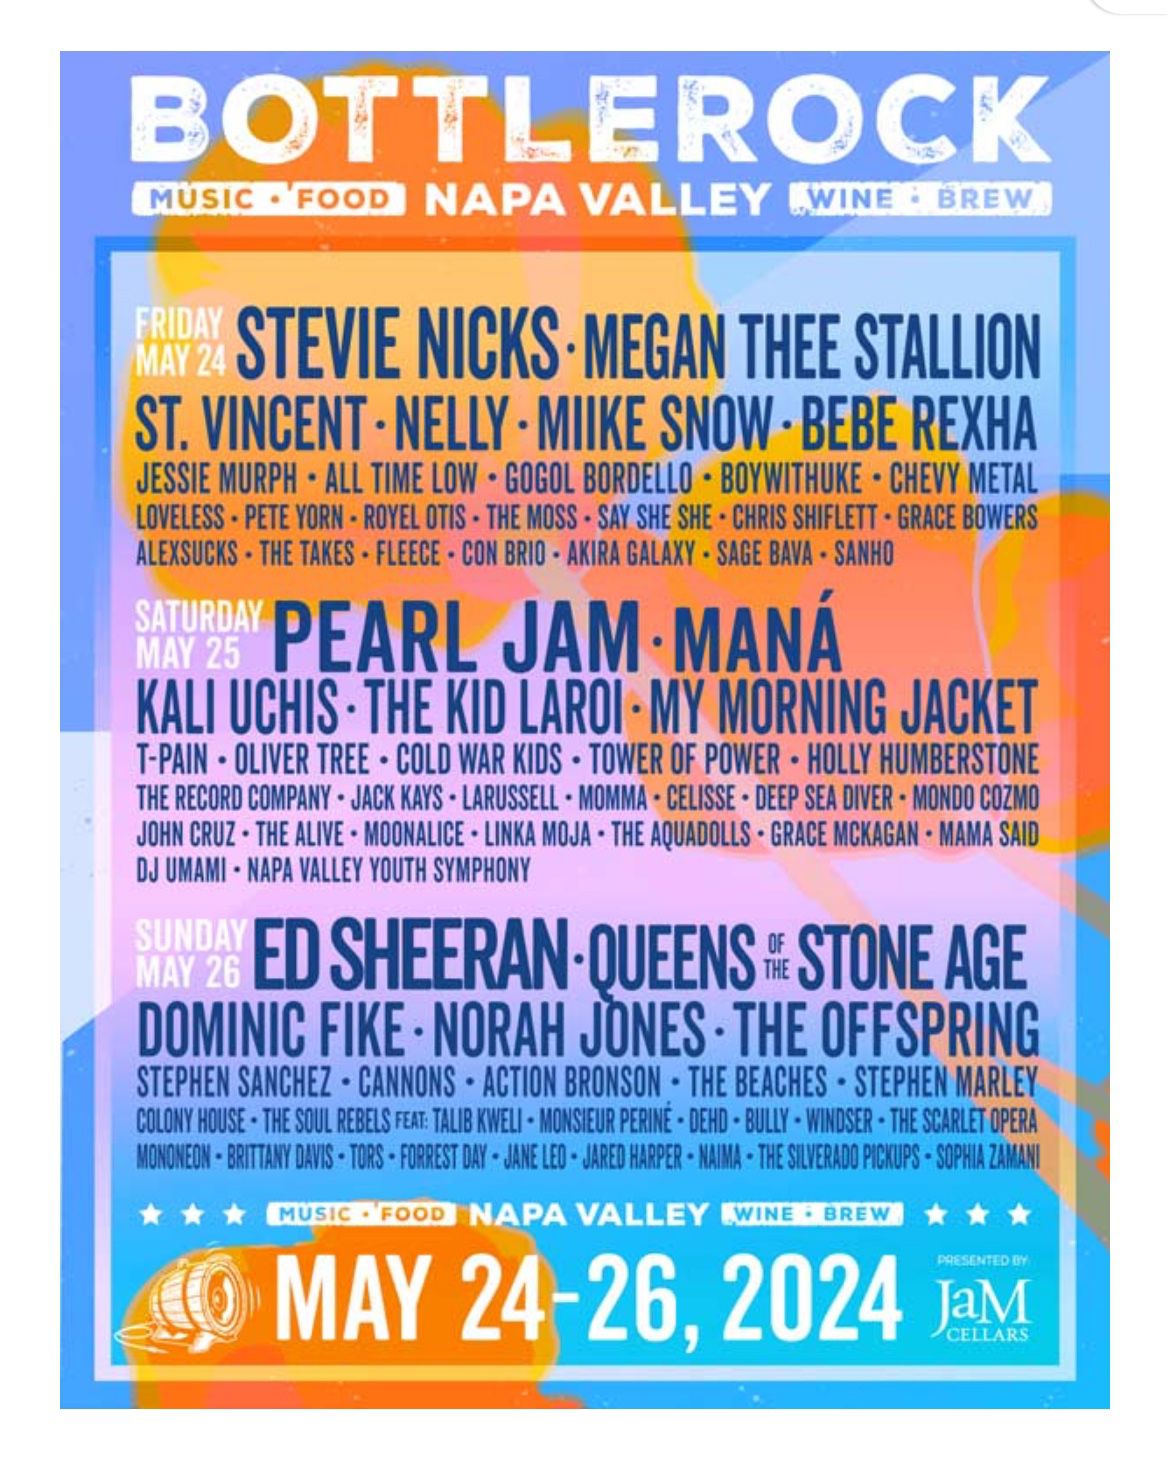 Bottlerock tickets For May 25th 2024